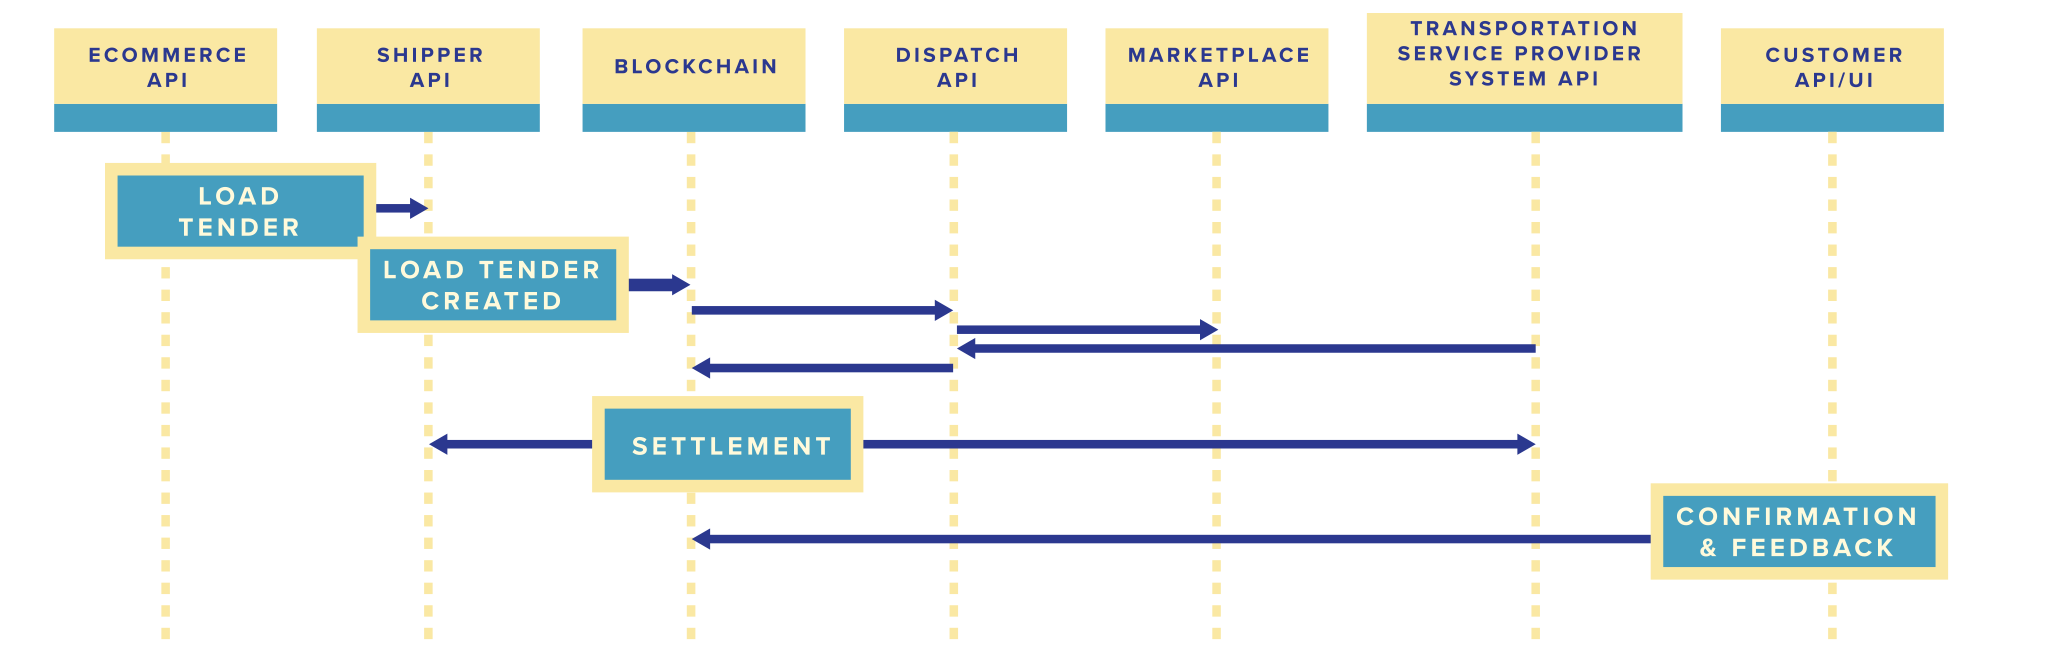 SupplyBloc connects various participants into one homogeneous information system with Blockchain, smart contracts, API gateways, SDKs and proprietary user-facing applications.